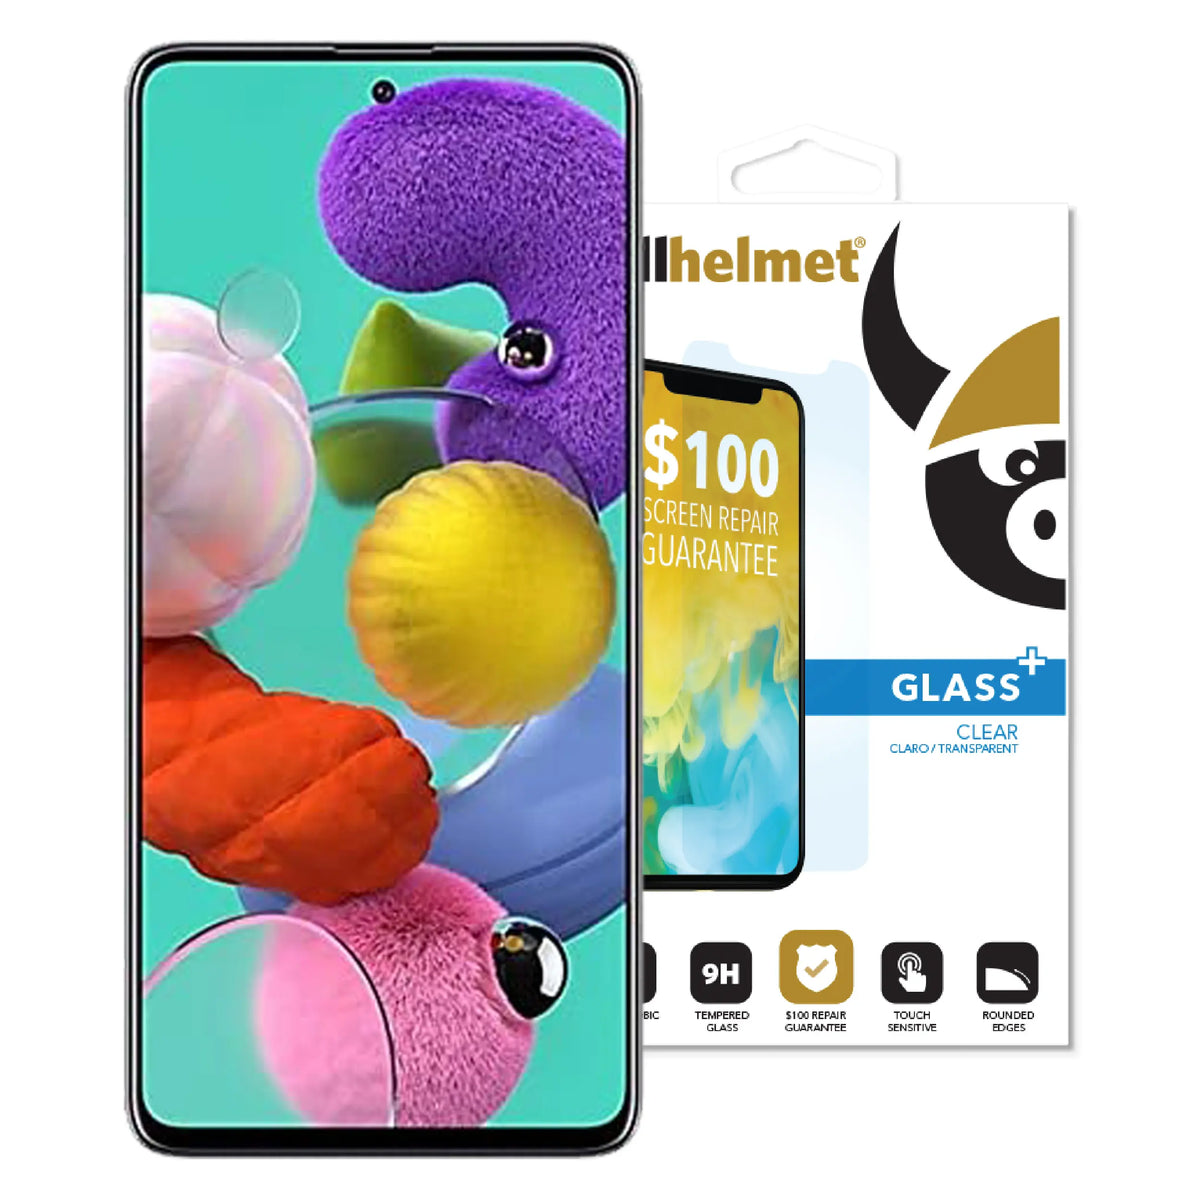 cellhelmet Tempered Glass for Galaxy A51 with Insurance